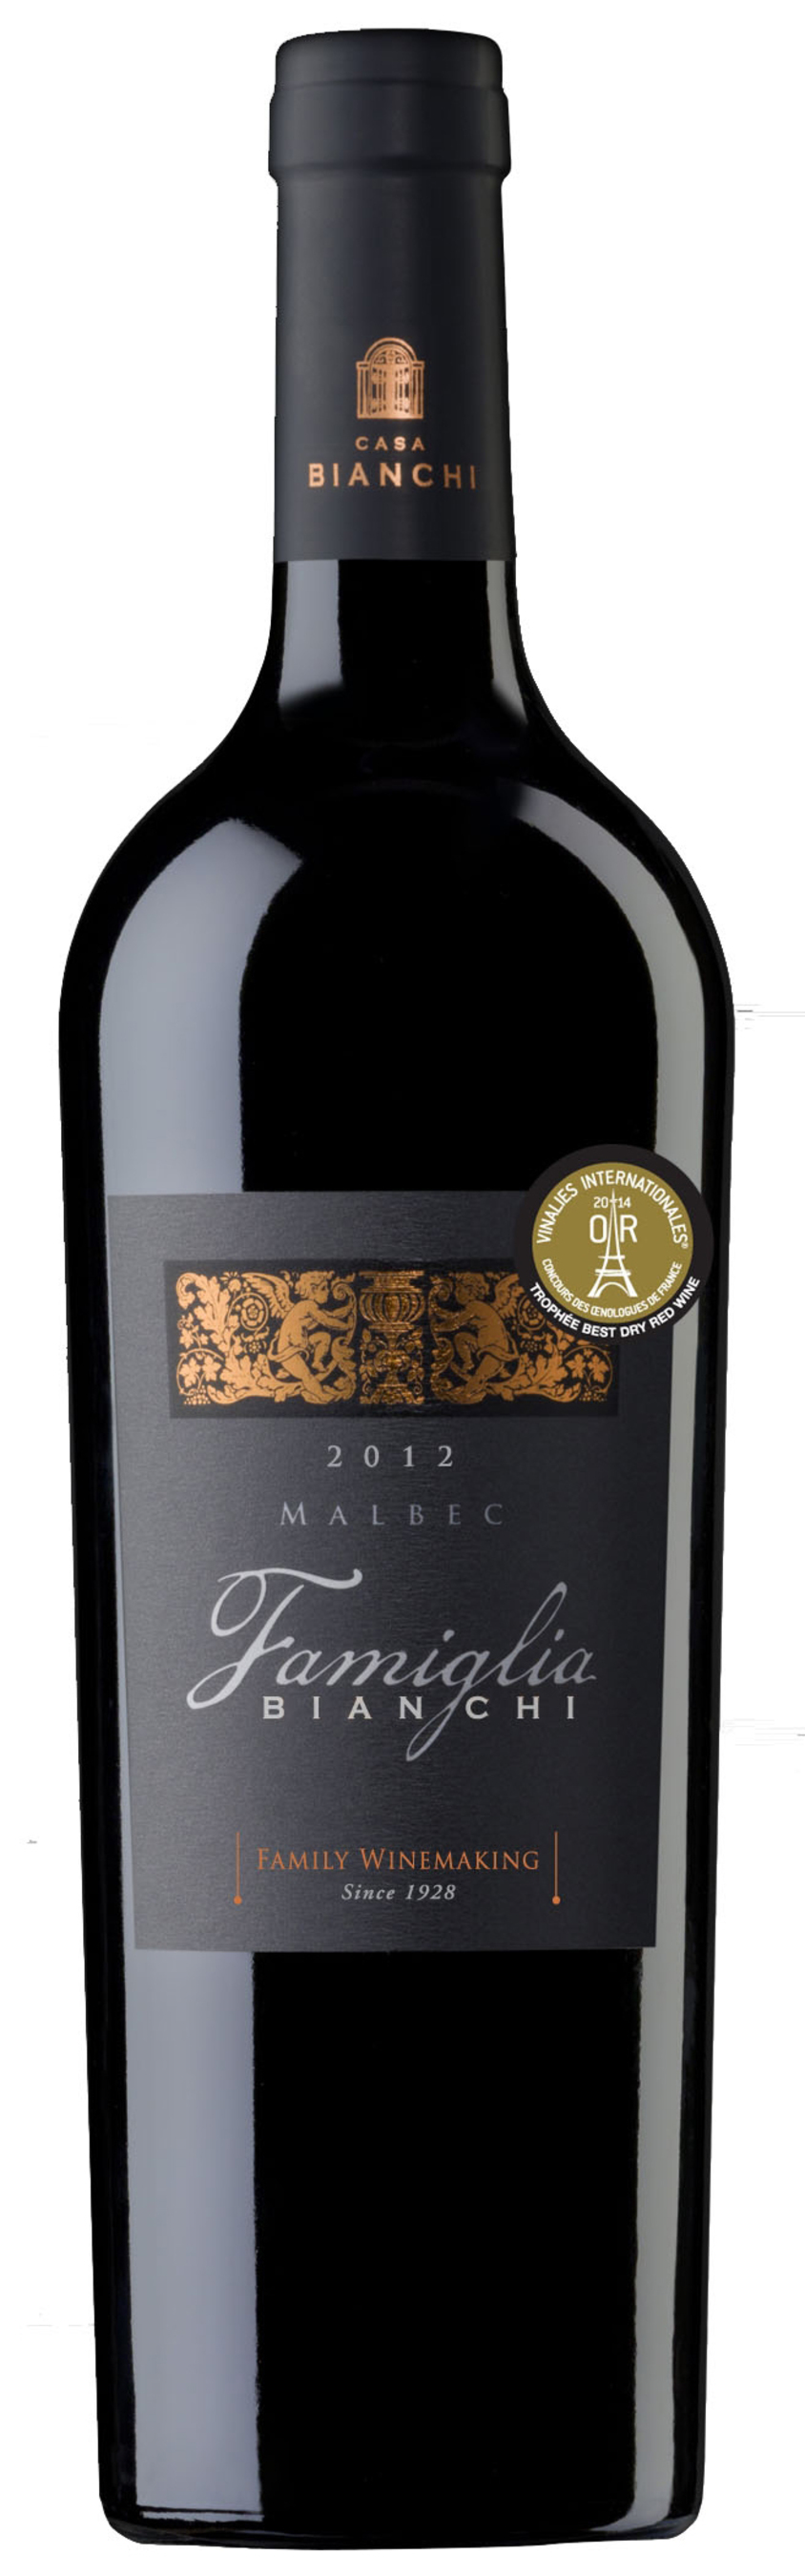 French Name Valentin Bianchi Famiglia Malbec 2012 As "Best Dry Red Wine" In The World (PRNewsFoto/Quintessential)